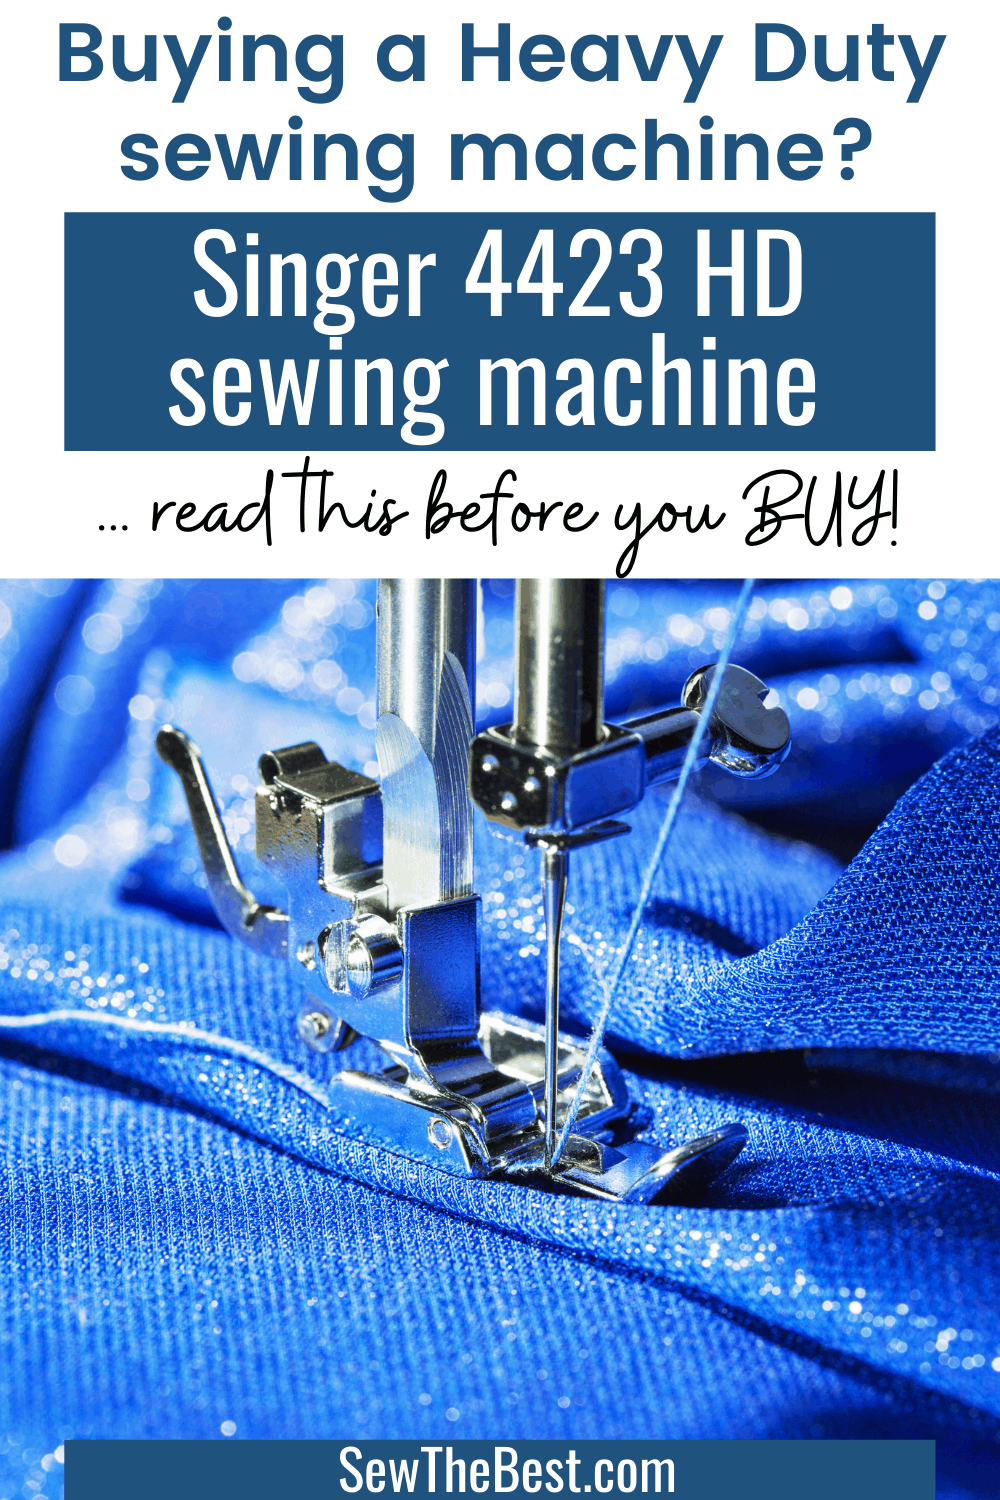 Buying a heavy duty sewing machine? Read this Singer 4423 review before you buy! Is this the right sewing machine for you? Singer sewing machine 4423, heavy duty singer sewing machine, review singer 4423 #AD #Sewing #SewingMachine